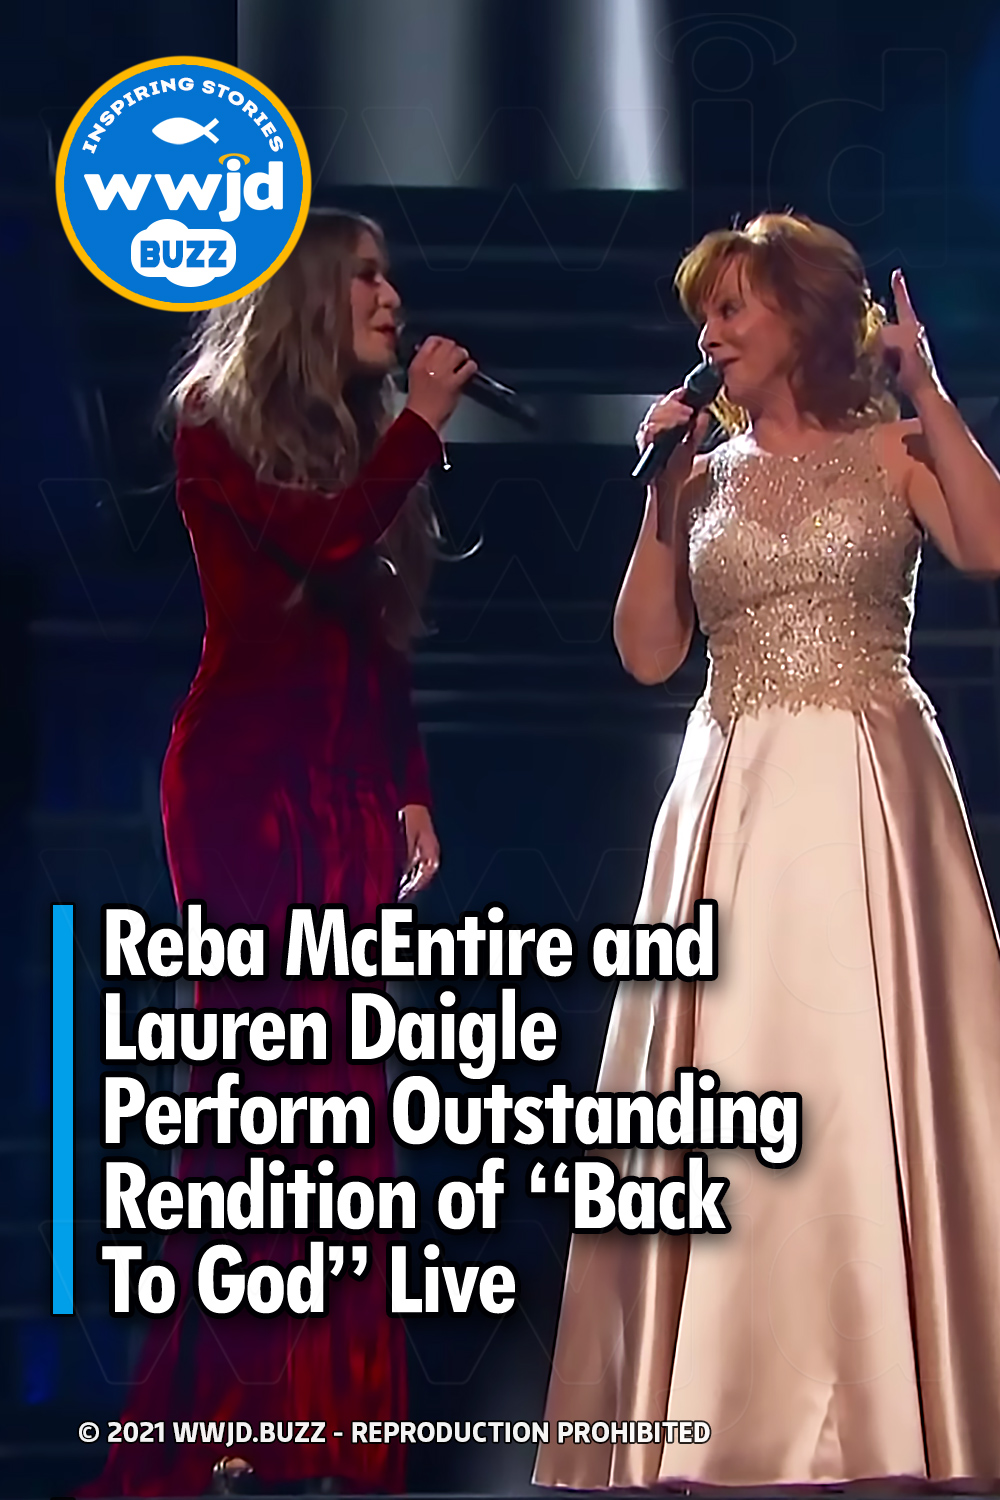 Reba McEntire and Lauren Daigle Perform Outstanding Rendition of “Back To God” Live